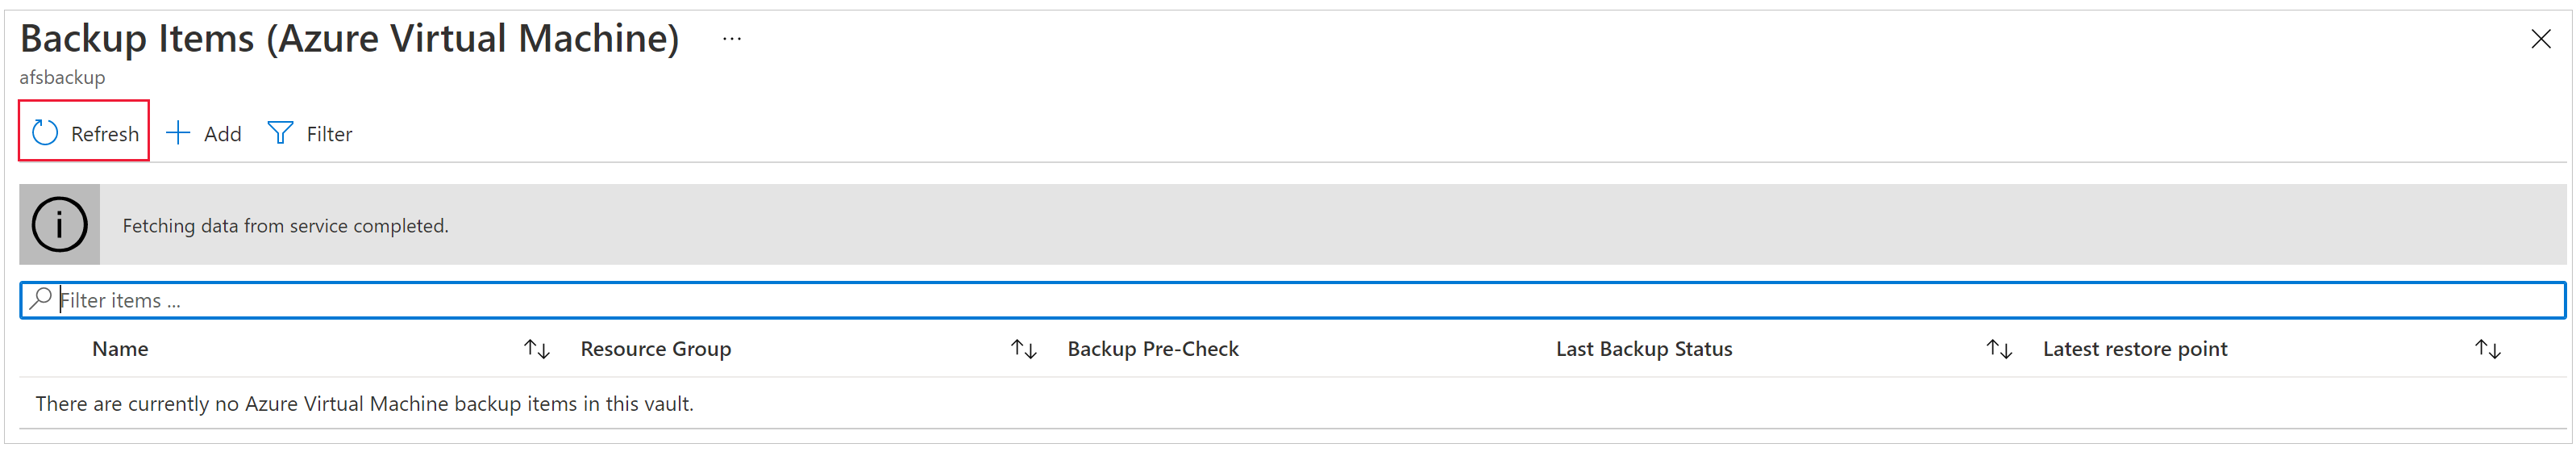 Screenshot of the Delete Backup Items page.